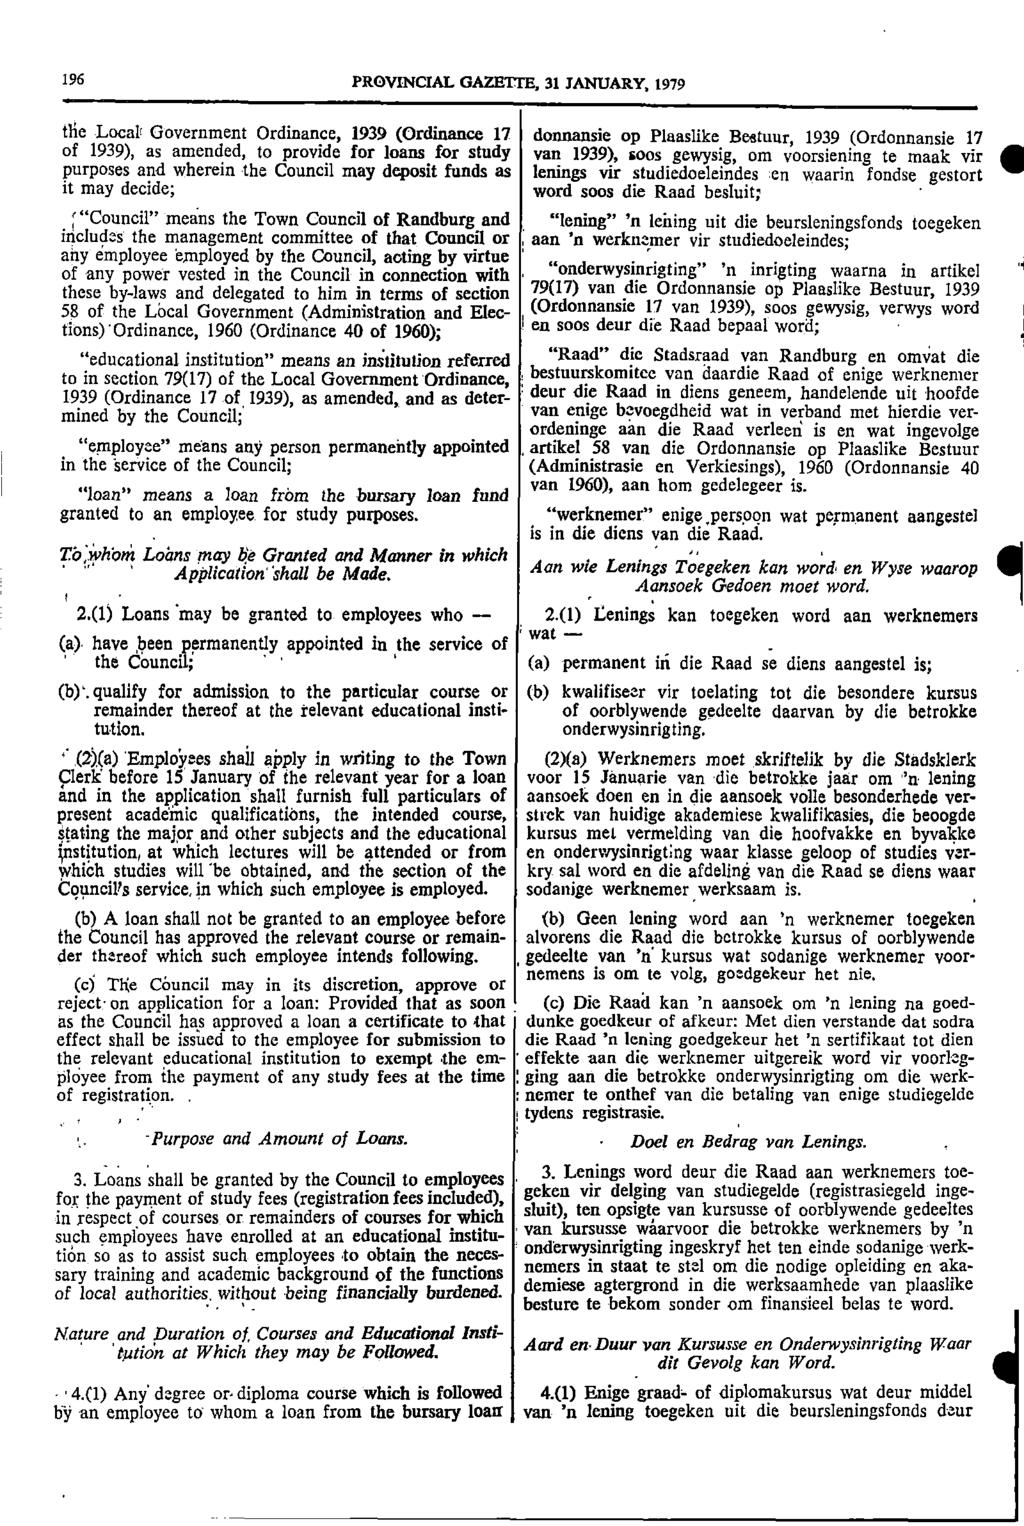 96 PROVNCAL GAZETTE 3 JANUARY 979 the Local Government Ordinance 939 (Ordinance 7 donnansie op Plaaslike Bestuur 939 (Ordonnansie 7 of 939) as amended to provide for loans for study van 939) coos